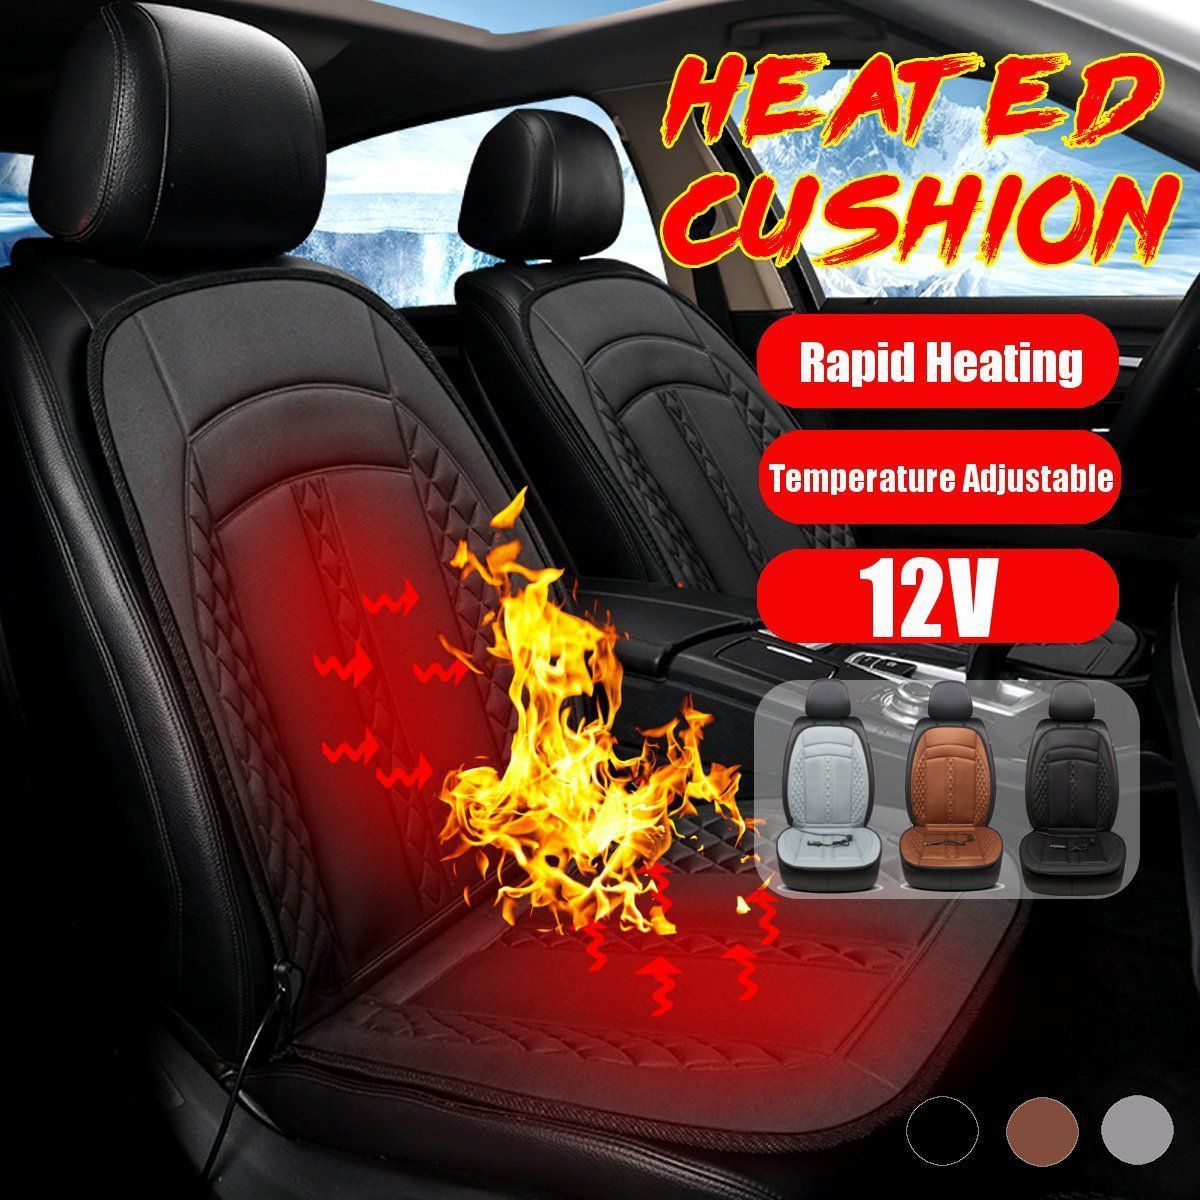 12V-150W-2-in-1-Air-Heater-Auto-Car-Heater-Cooling-Fan-Defrost-Defogging-Portable-1599483